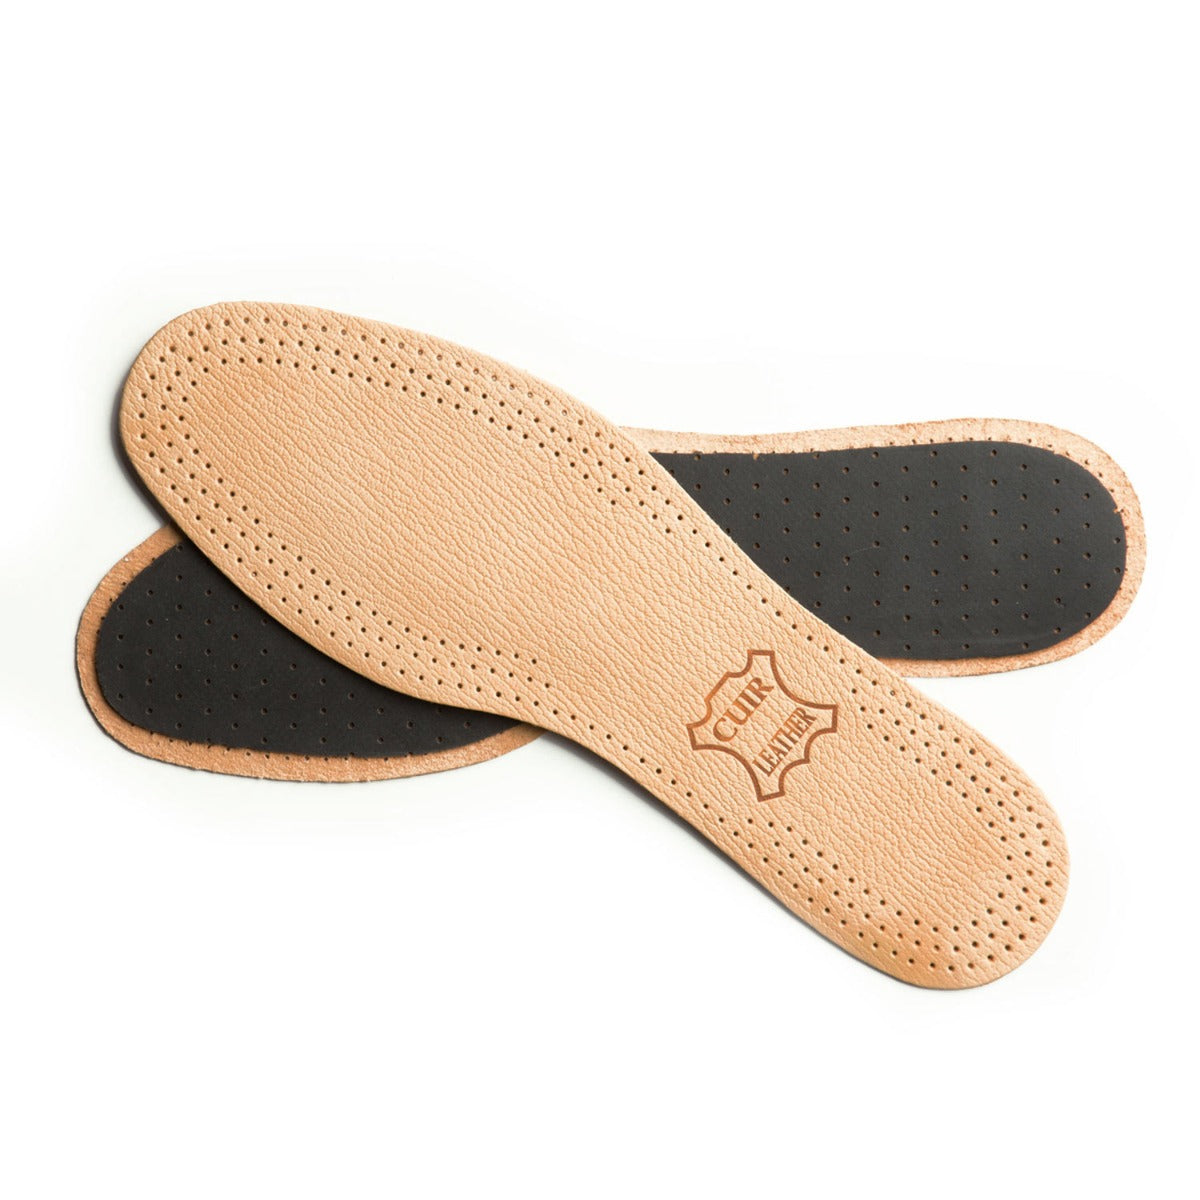 Saphir Leather Insole w Charcoal Bottom